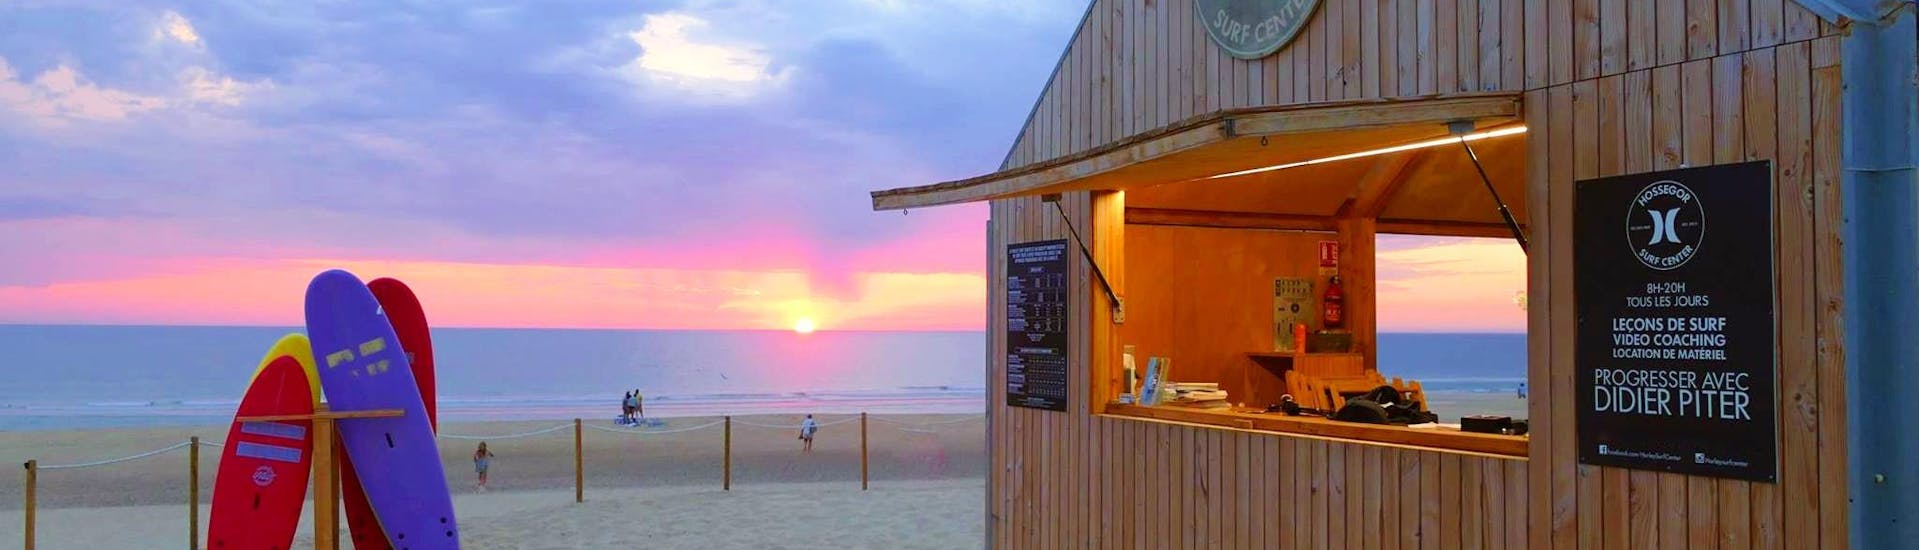 View from the Hossegor Surf Center surf school hut on the Culs Nuls beach in Hossegor at sunset, where the surf lessons take place.